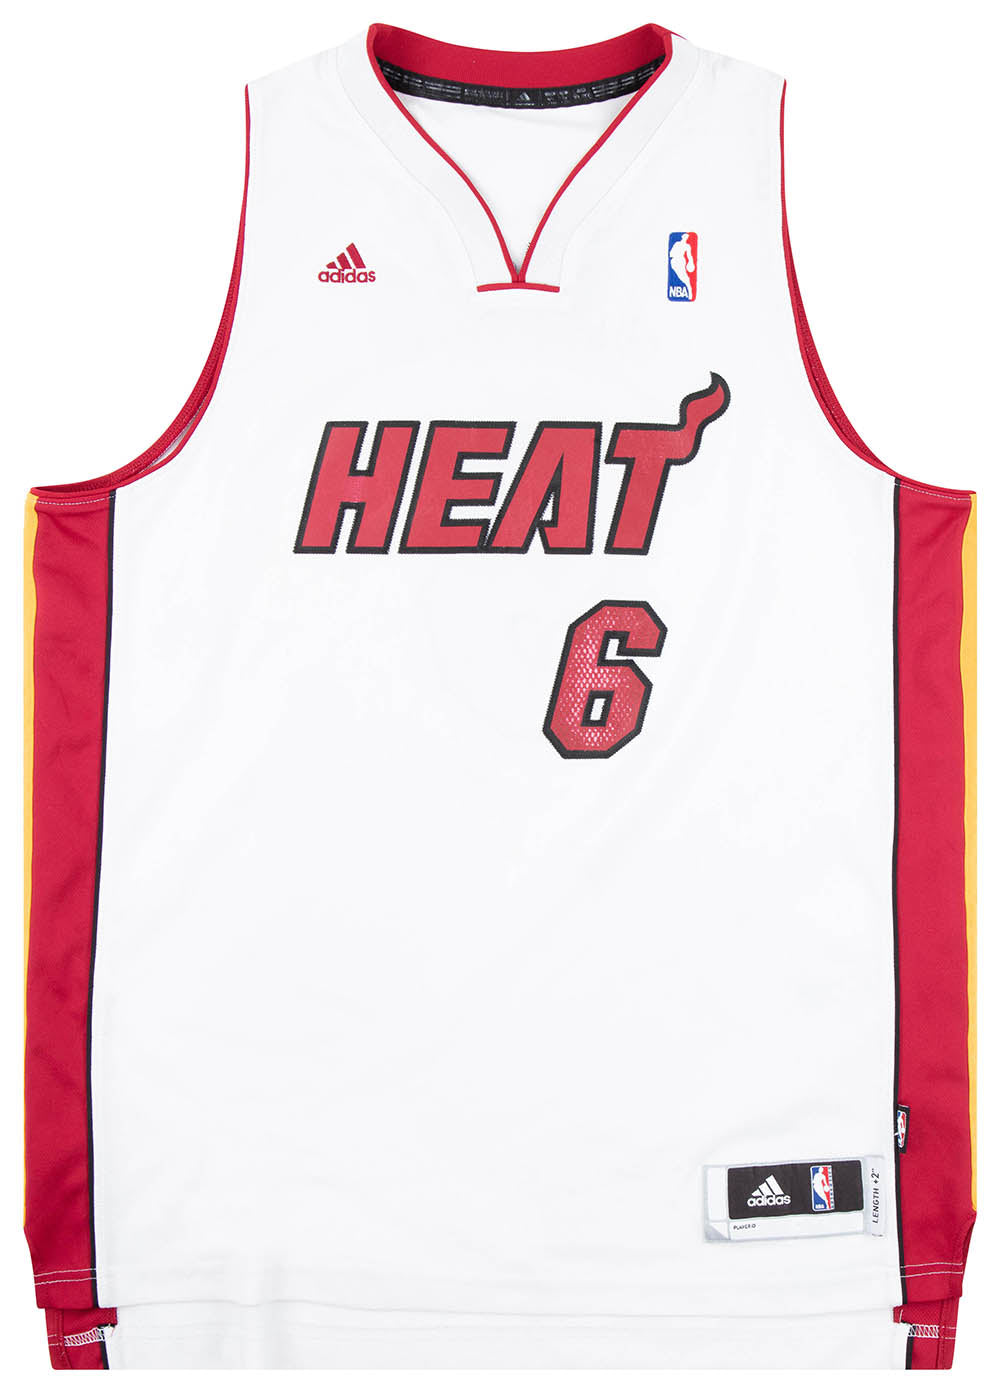 Miami Heat Basketball Jersey 2010/11 by Adidas – Lebron 6 - SportingPlus -  Passion for Sport